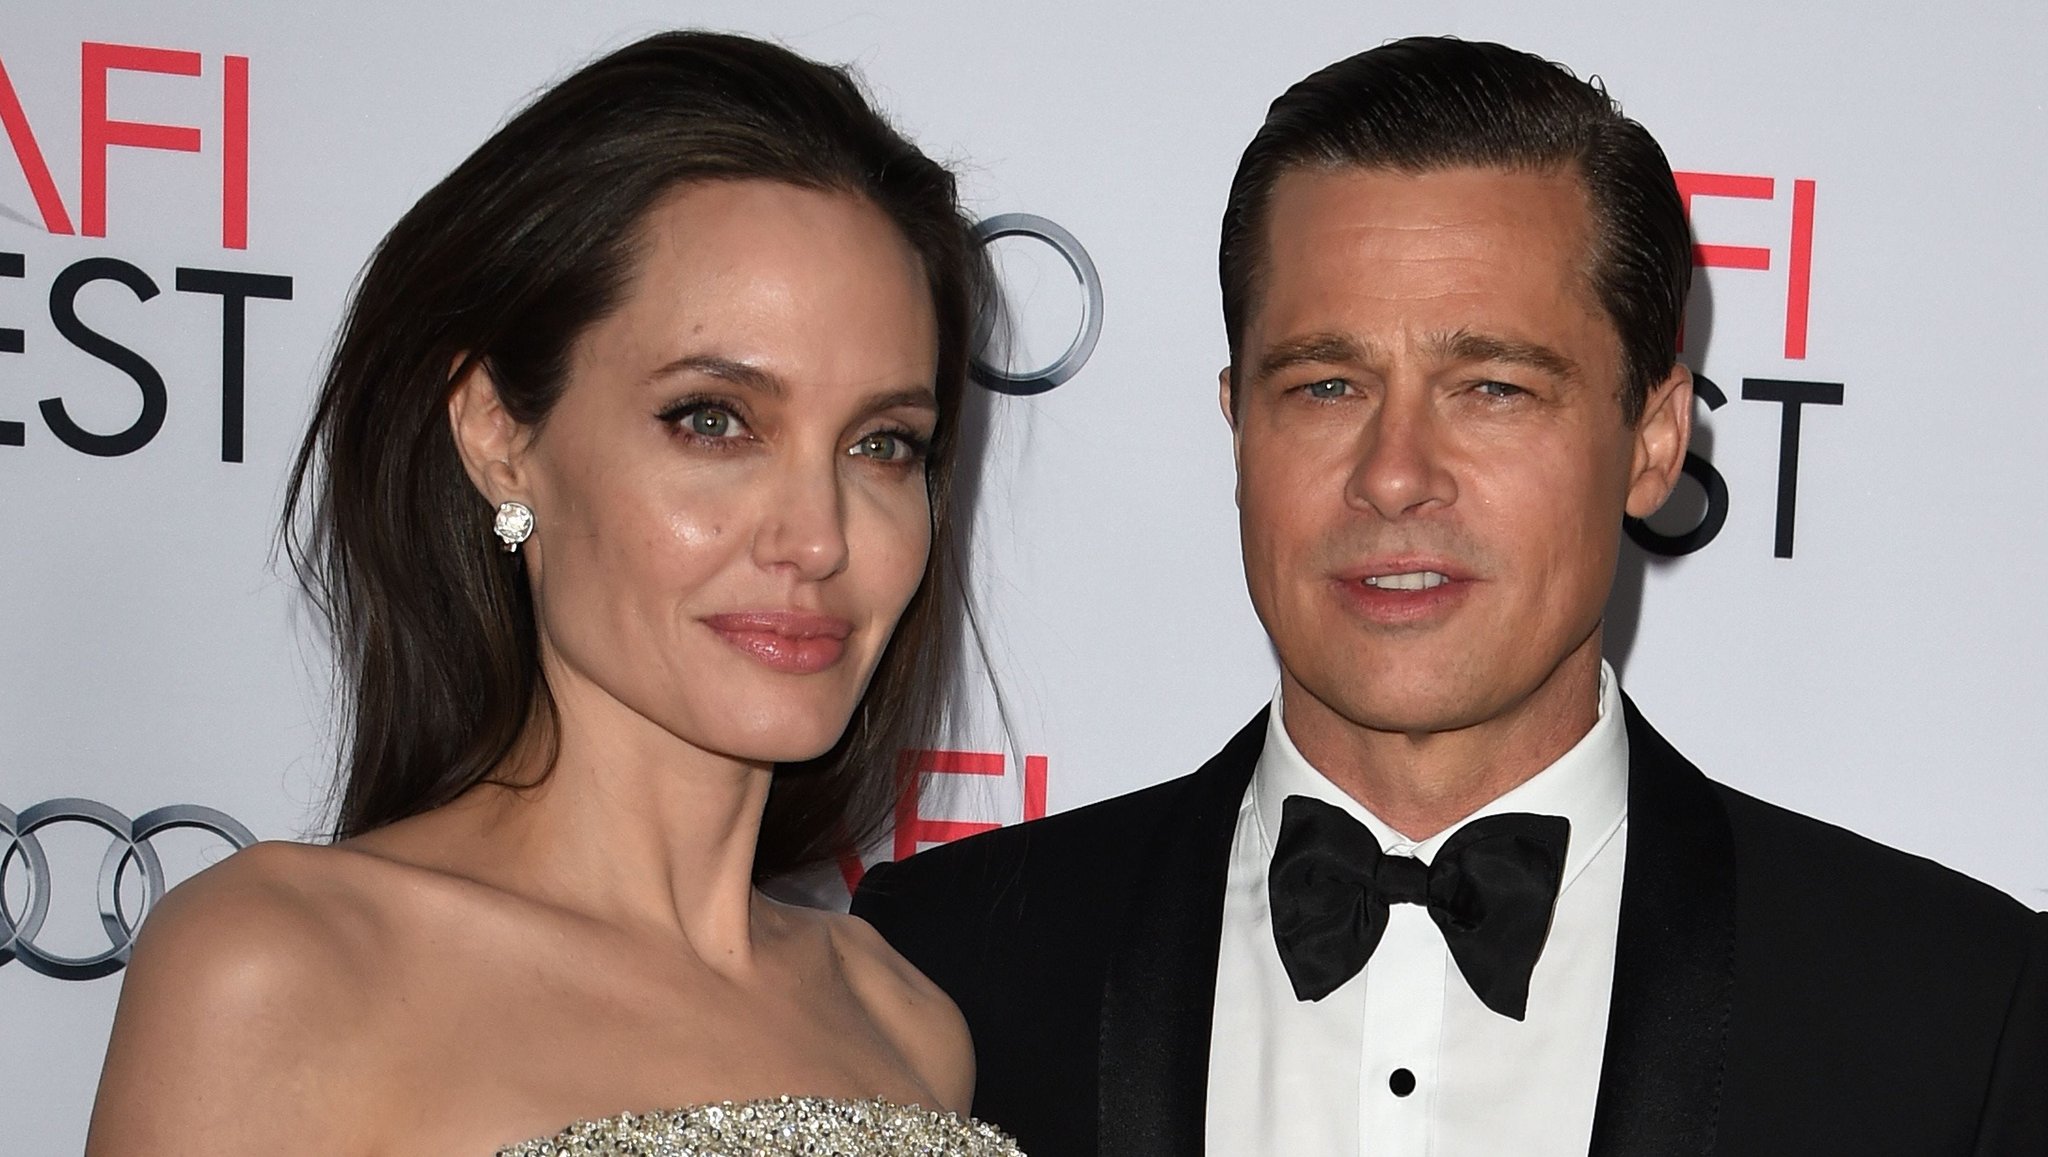 Brad Pitt dealt a heavy blow to Angelina: He summoned her former colleague to trial